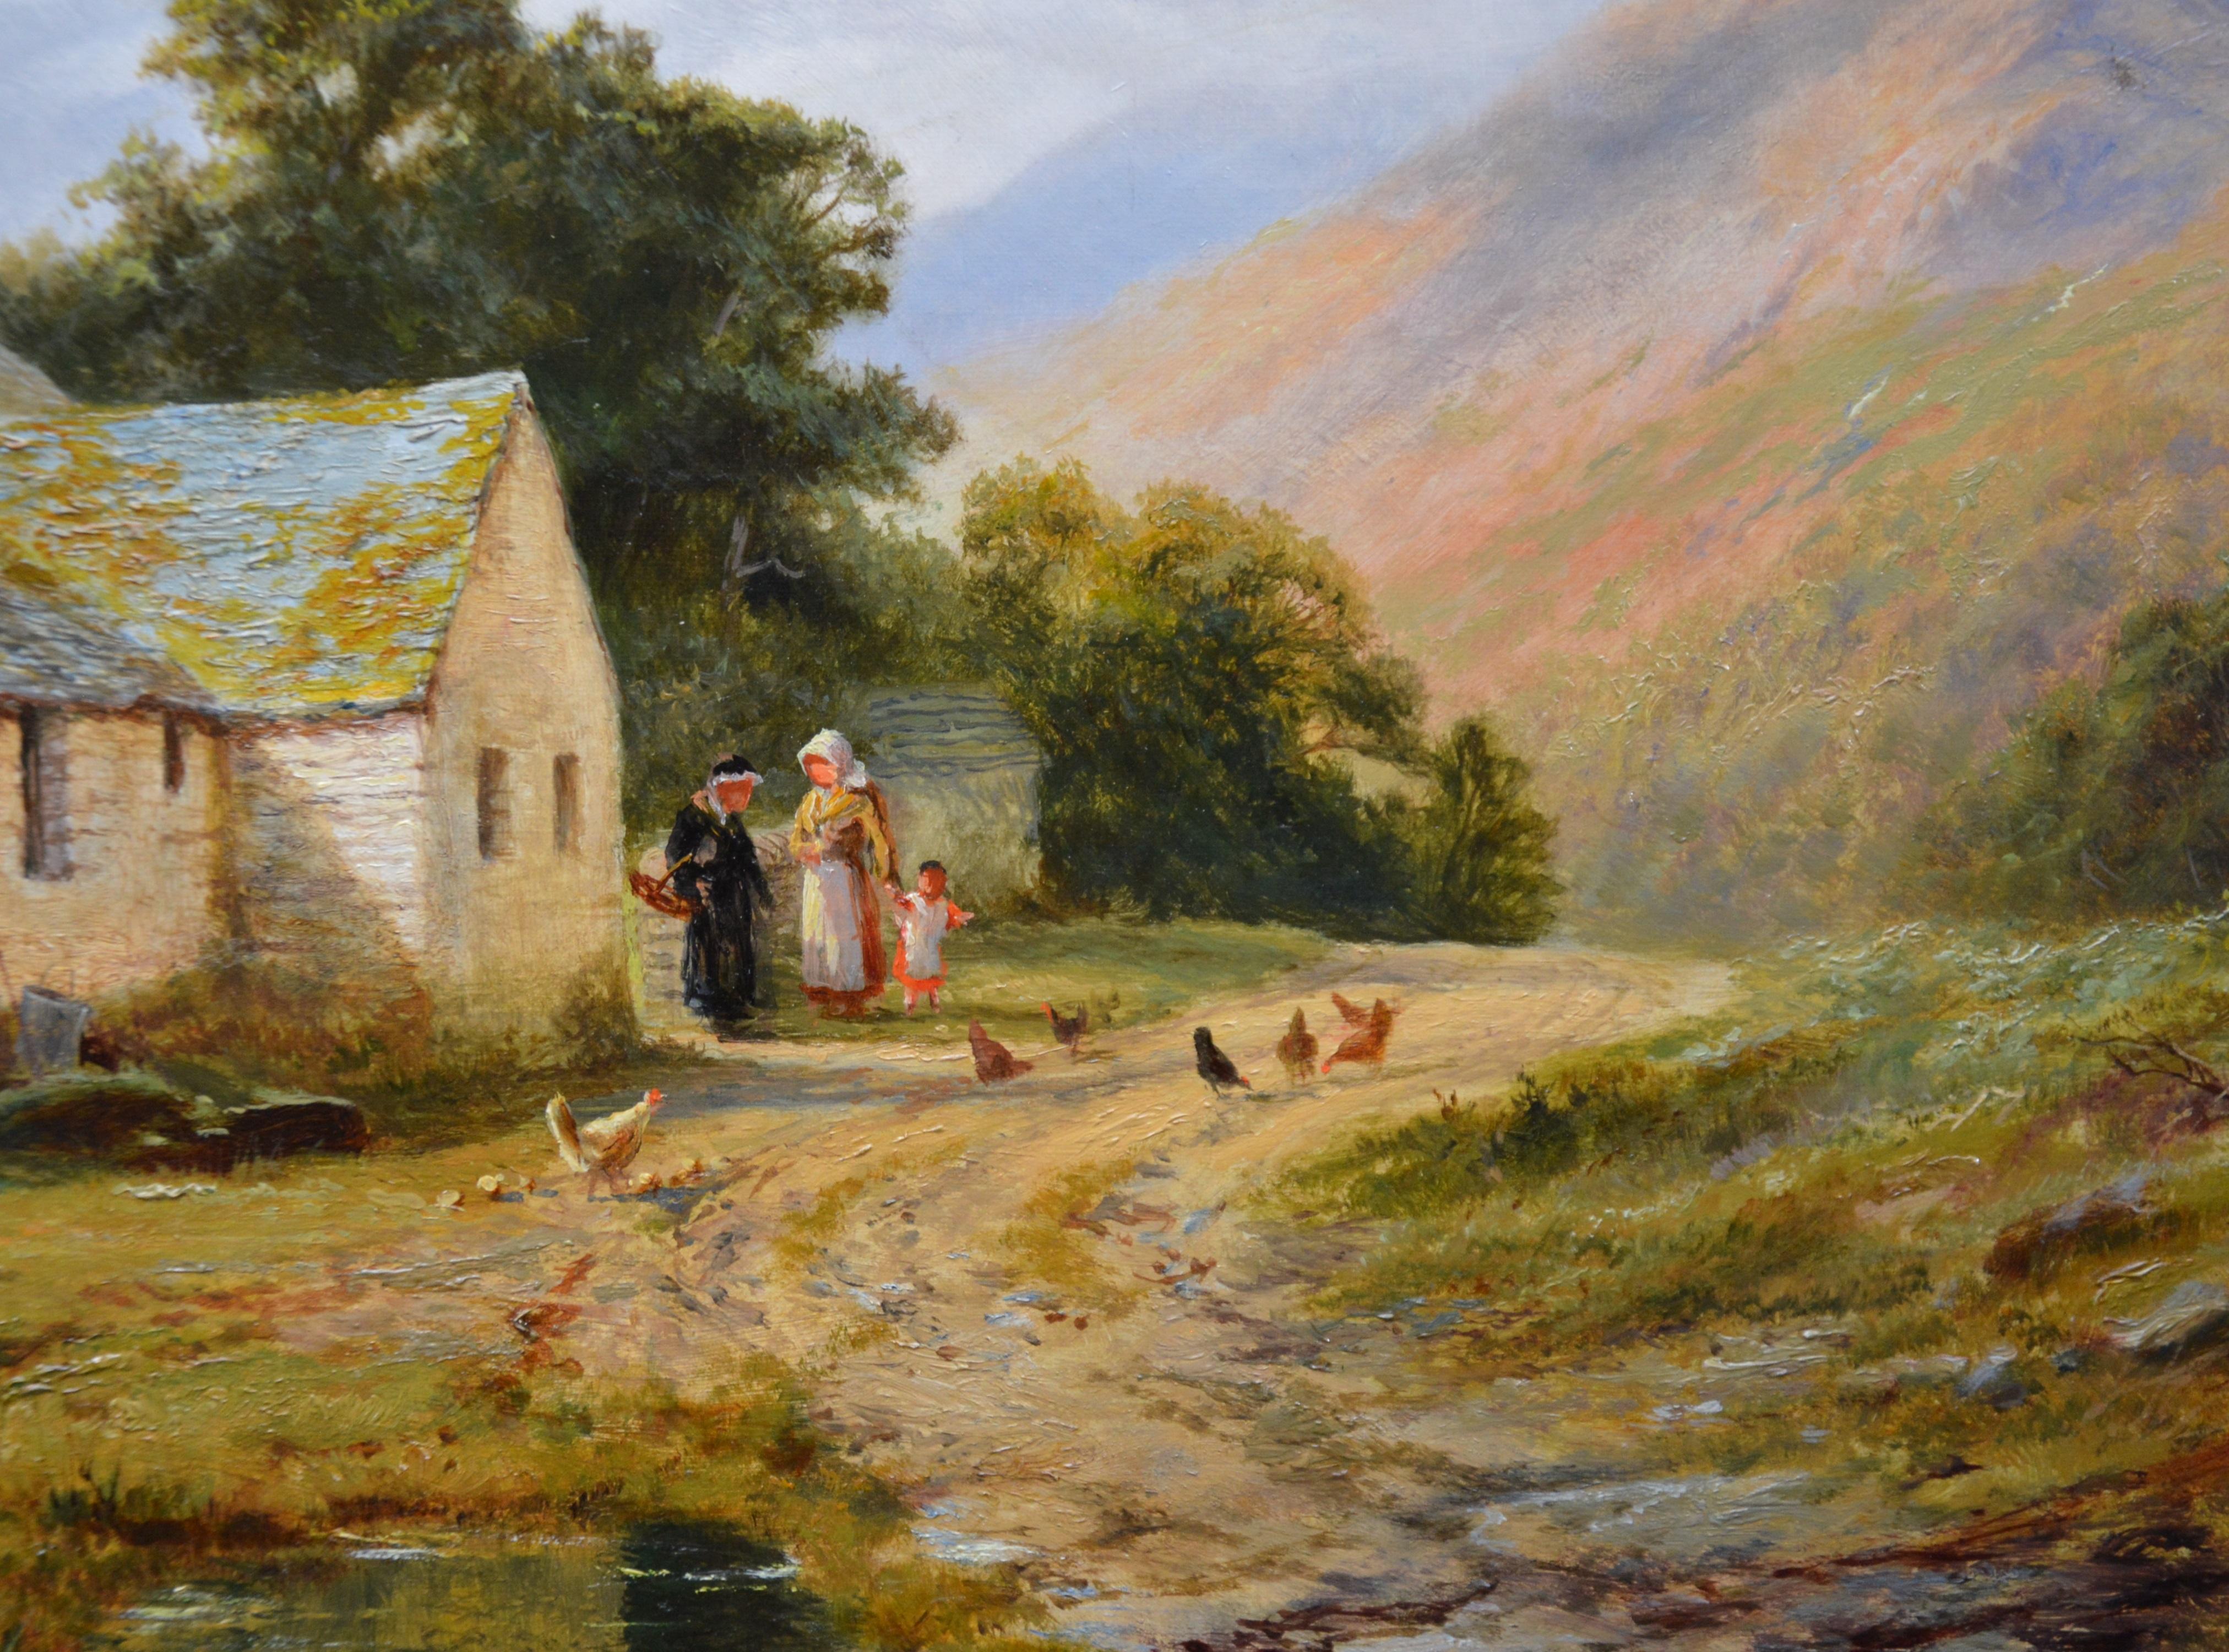 ‘In the Lledr Valley’ by Robert Gallon (1845-1925). The painting - which depicts a mother and child outside a Welsh cottage on a summer’s day - is signed by the artist and hangs in a newly commissioned gold metal leaf frame of fine quality.

Academy